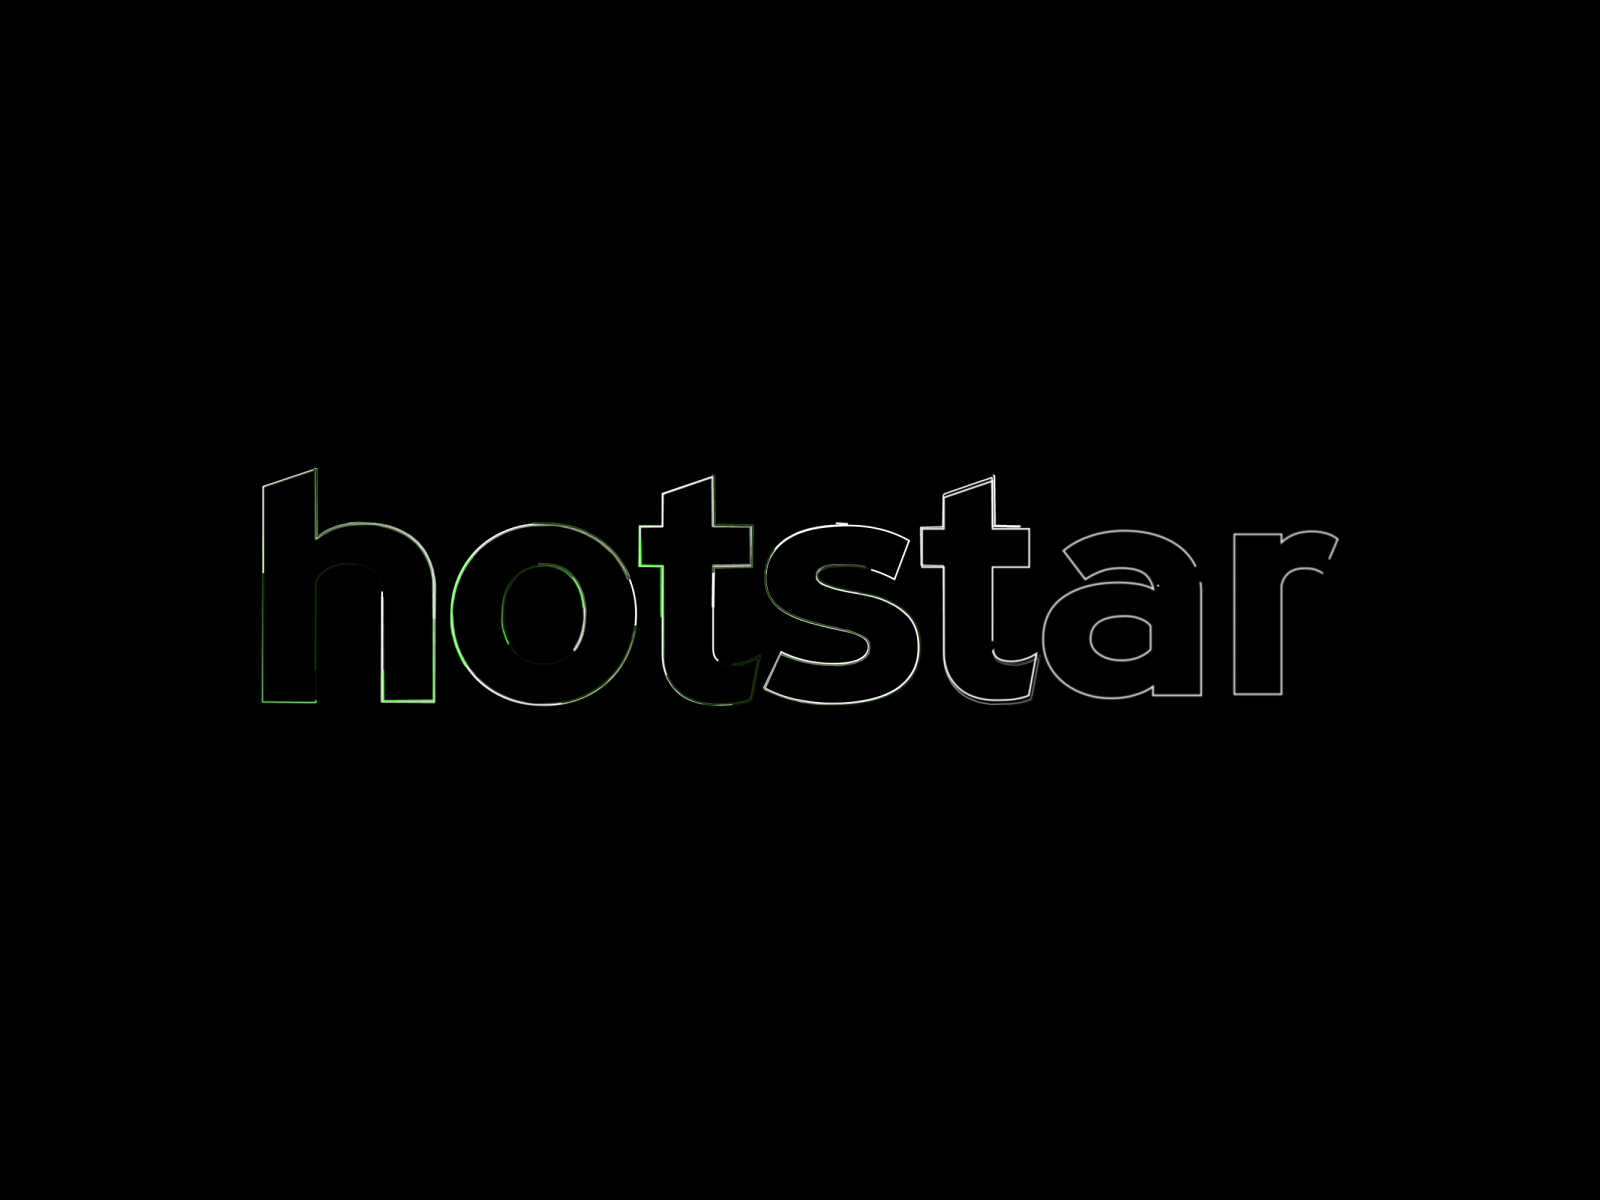 Disney+ Hotstar Reduces Price Of VIP Pack: Find Out Why - Gizbot News